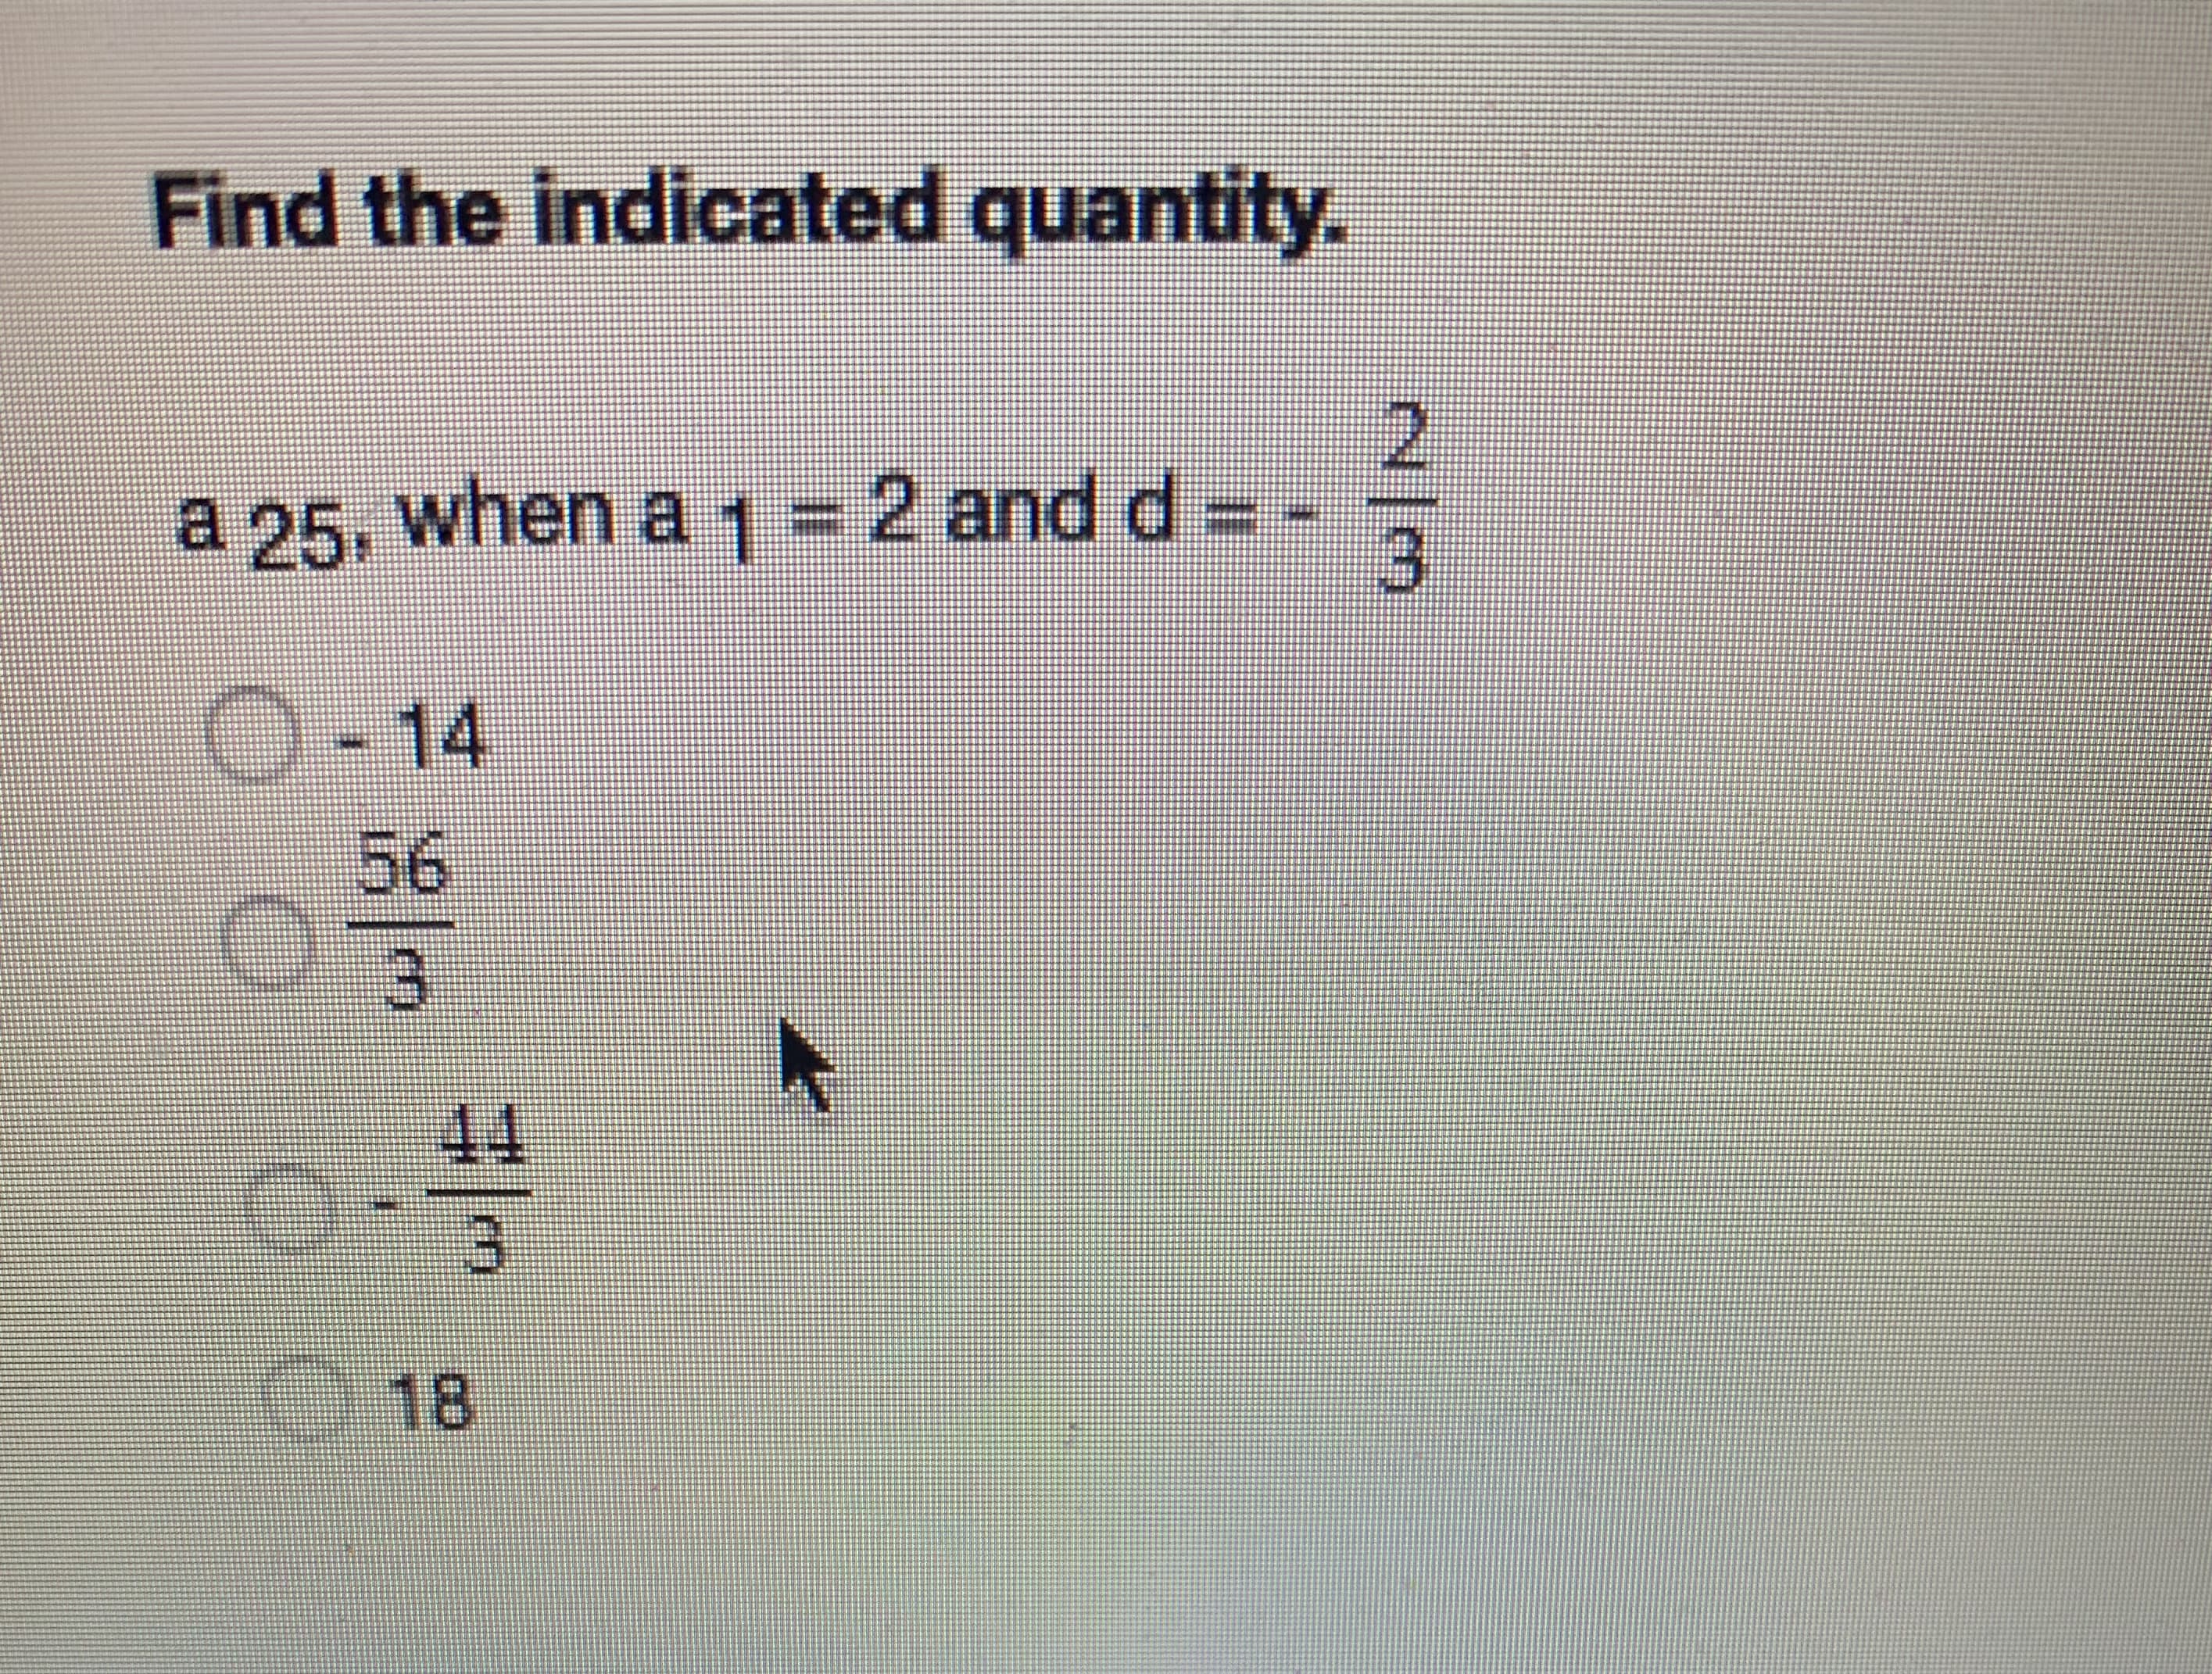 Find the indicated quantity.
2.
a 25, when a 1-2 and d =
N/3
